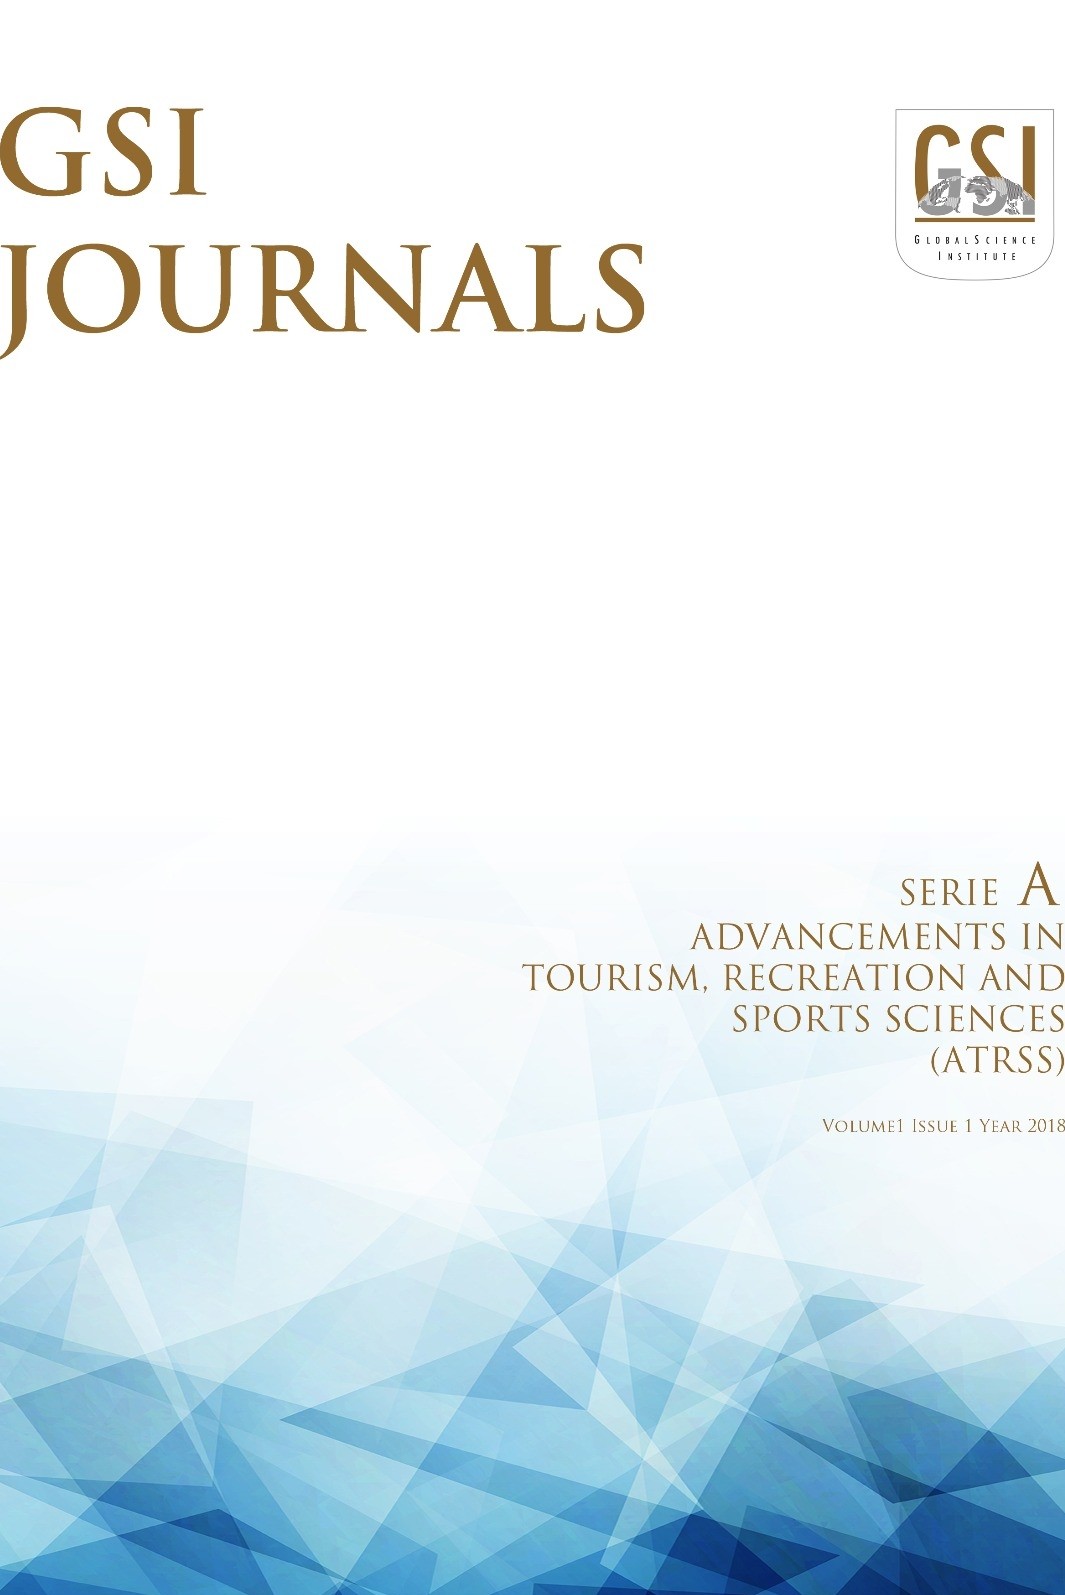 GSI Journals Serie A: Advancements in Tourism Recreation and Sports Sciences